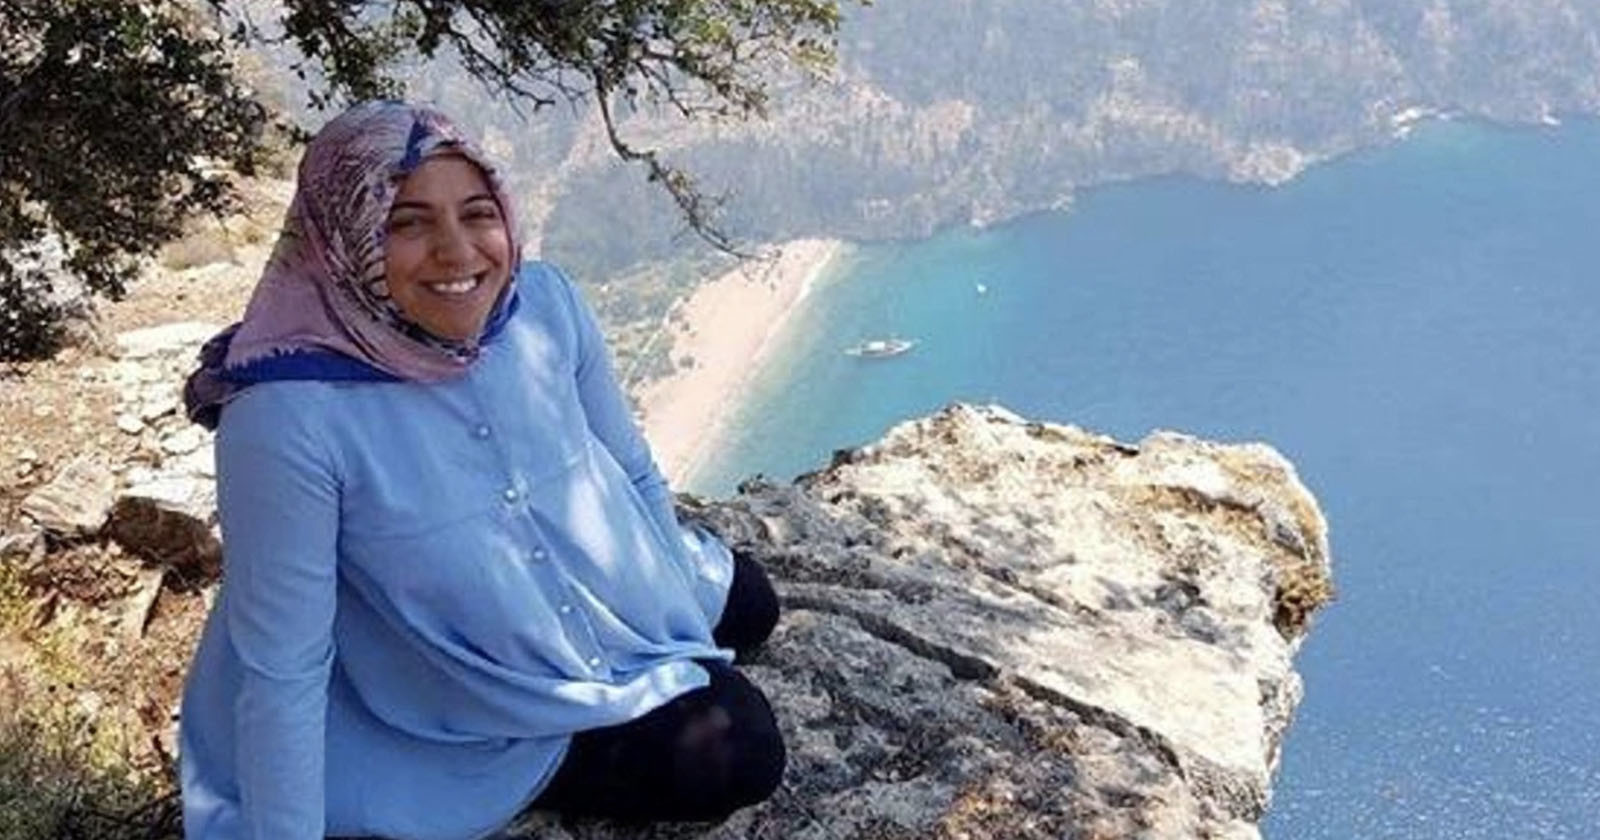 Husband Lured Wife for a Selfie on Cliff Edge Before Killing Her